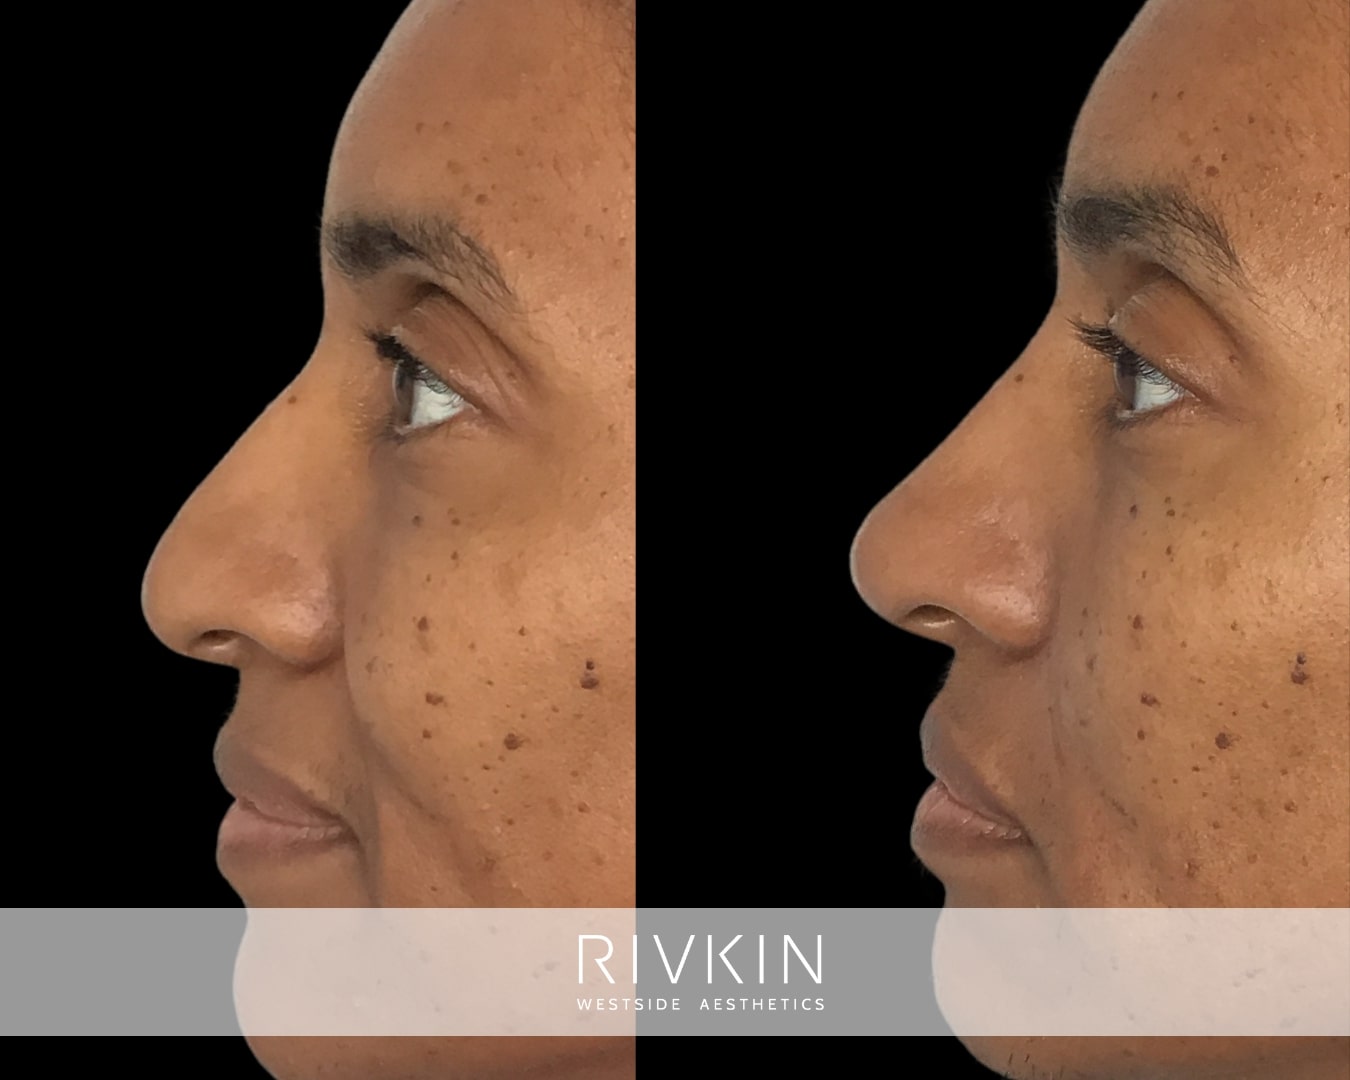 Correcting this patient's tip with nose filler injections made her face appear more youthful and vibrant.